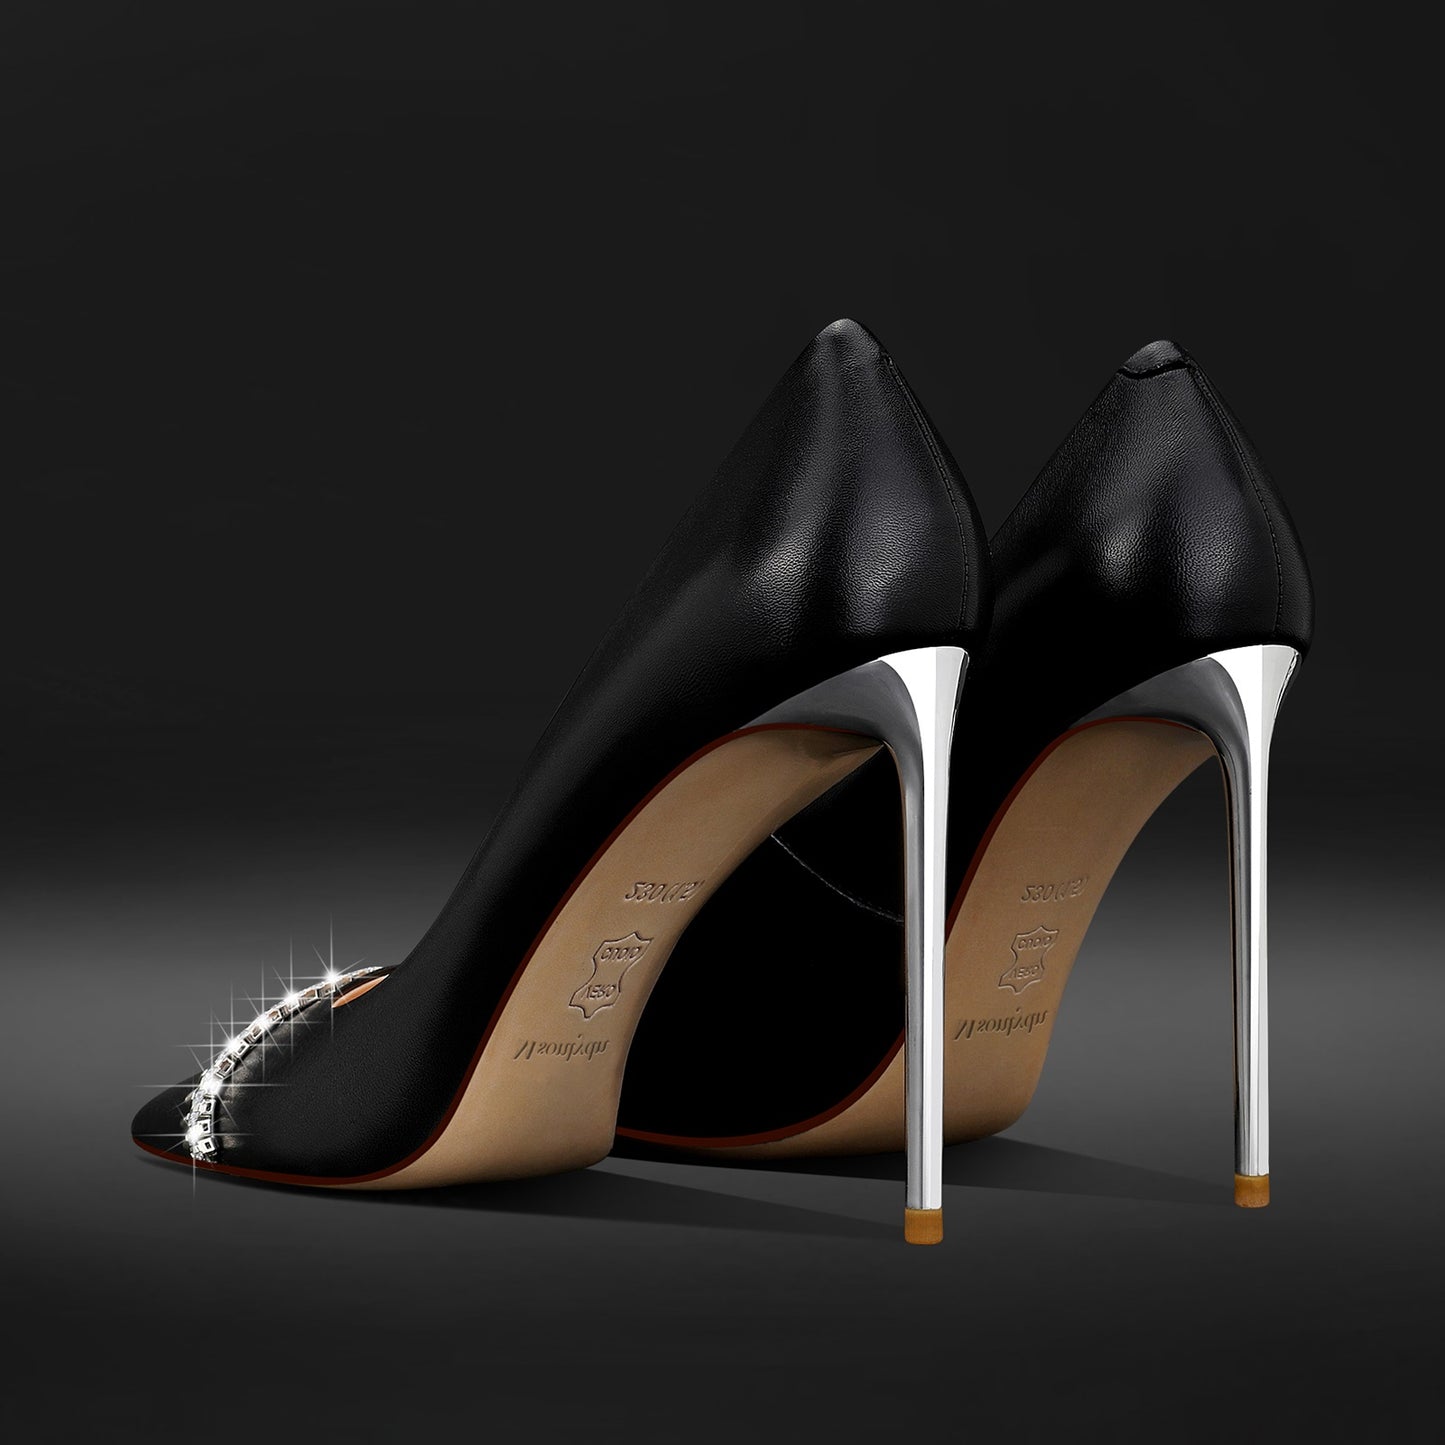 D'Orsay Black Stiletto High Heel Pumps for Women - Pointed Toe Leather Shoes